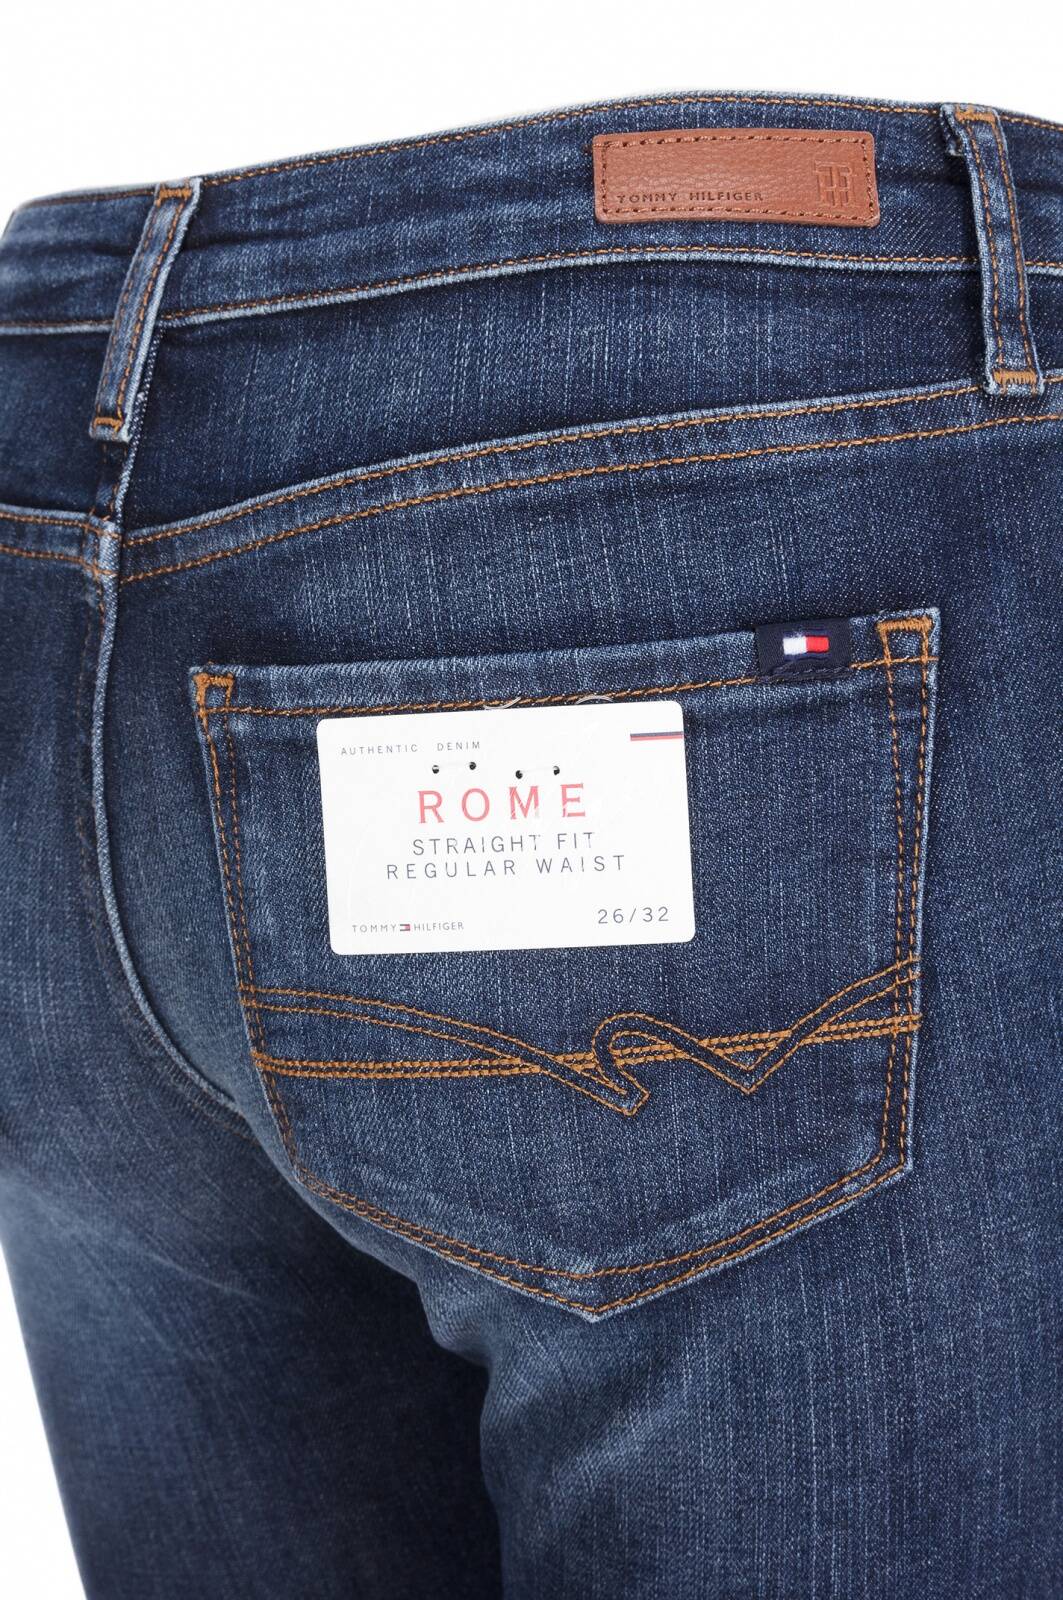 jeans rome tommy hilfiger